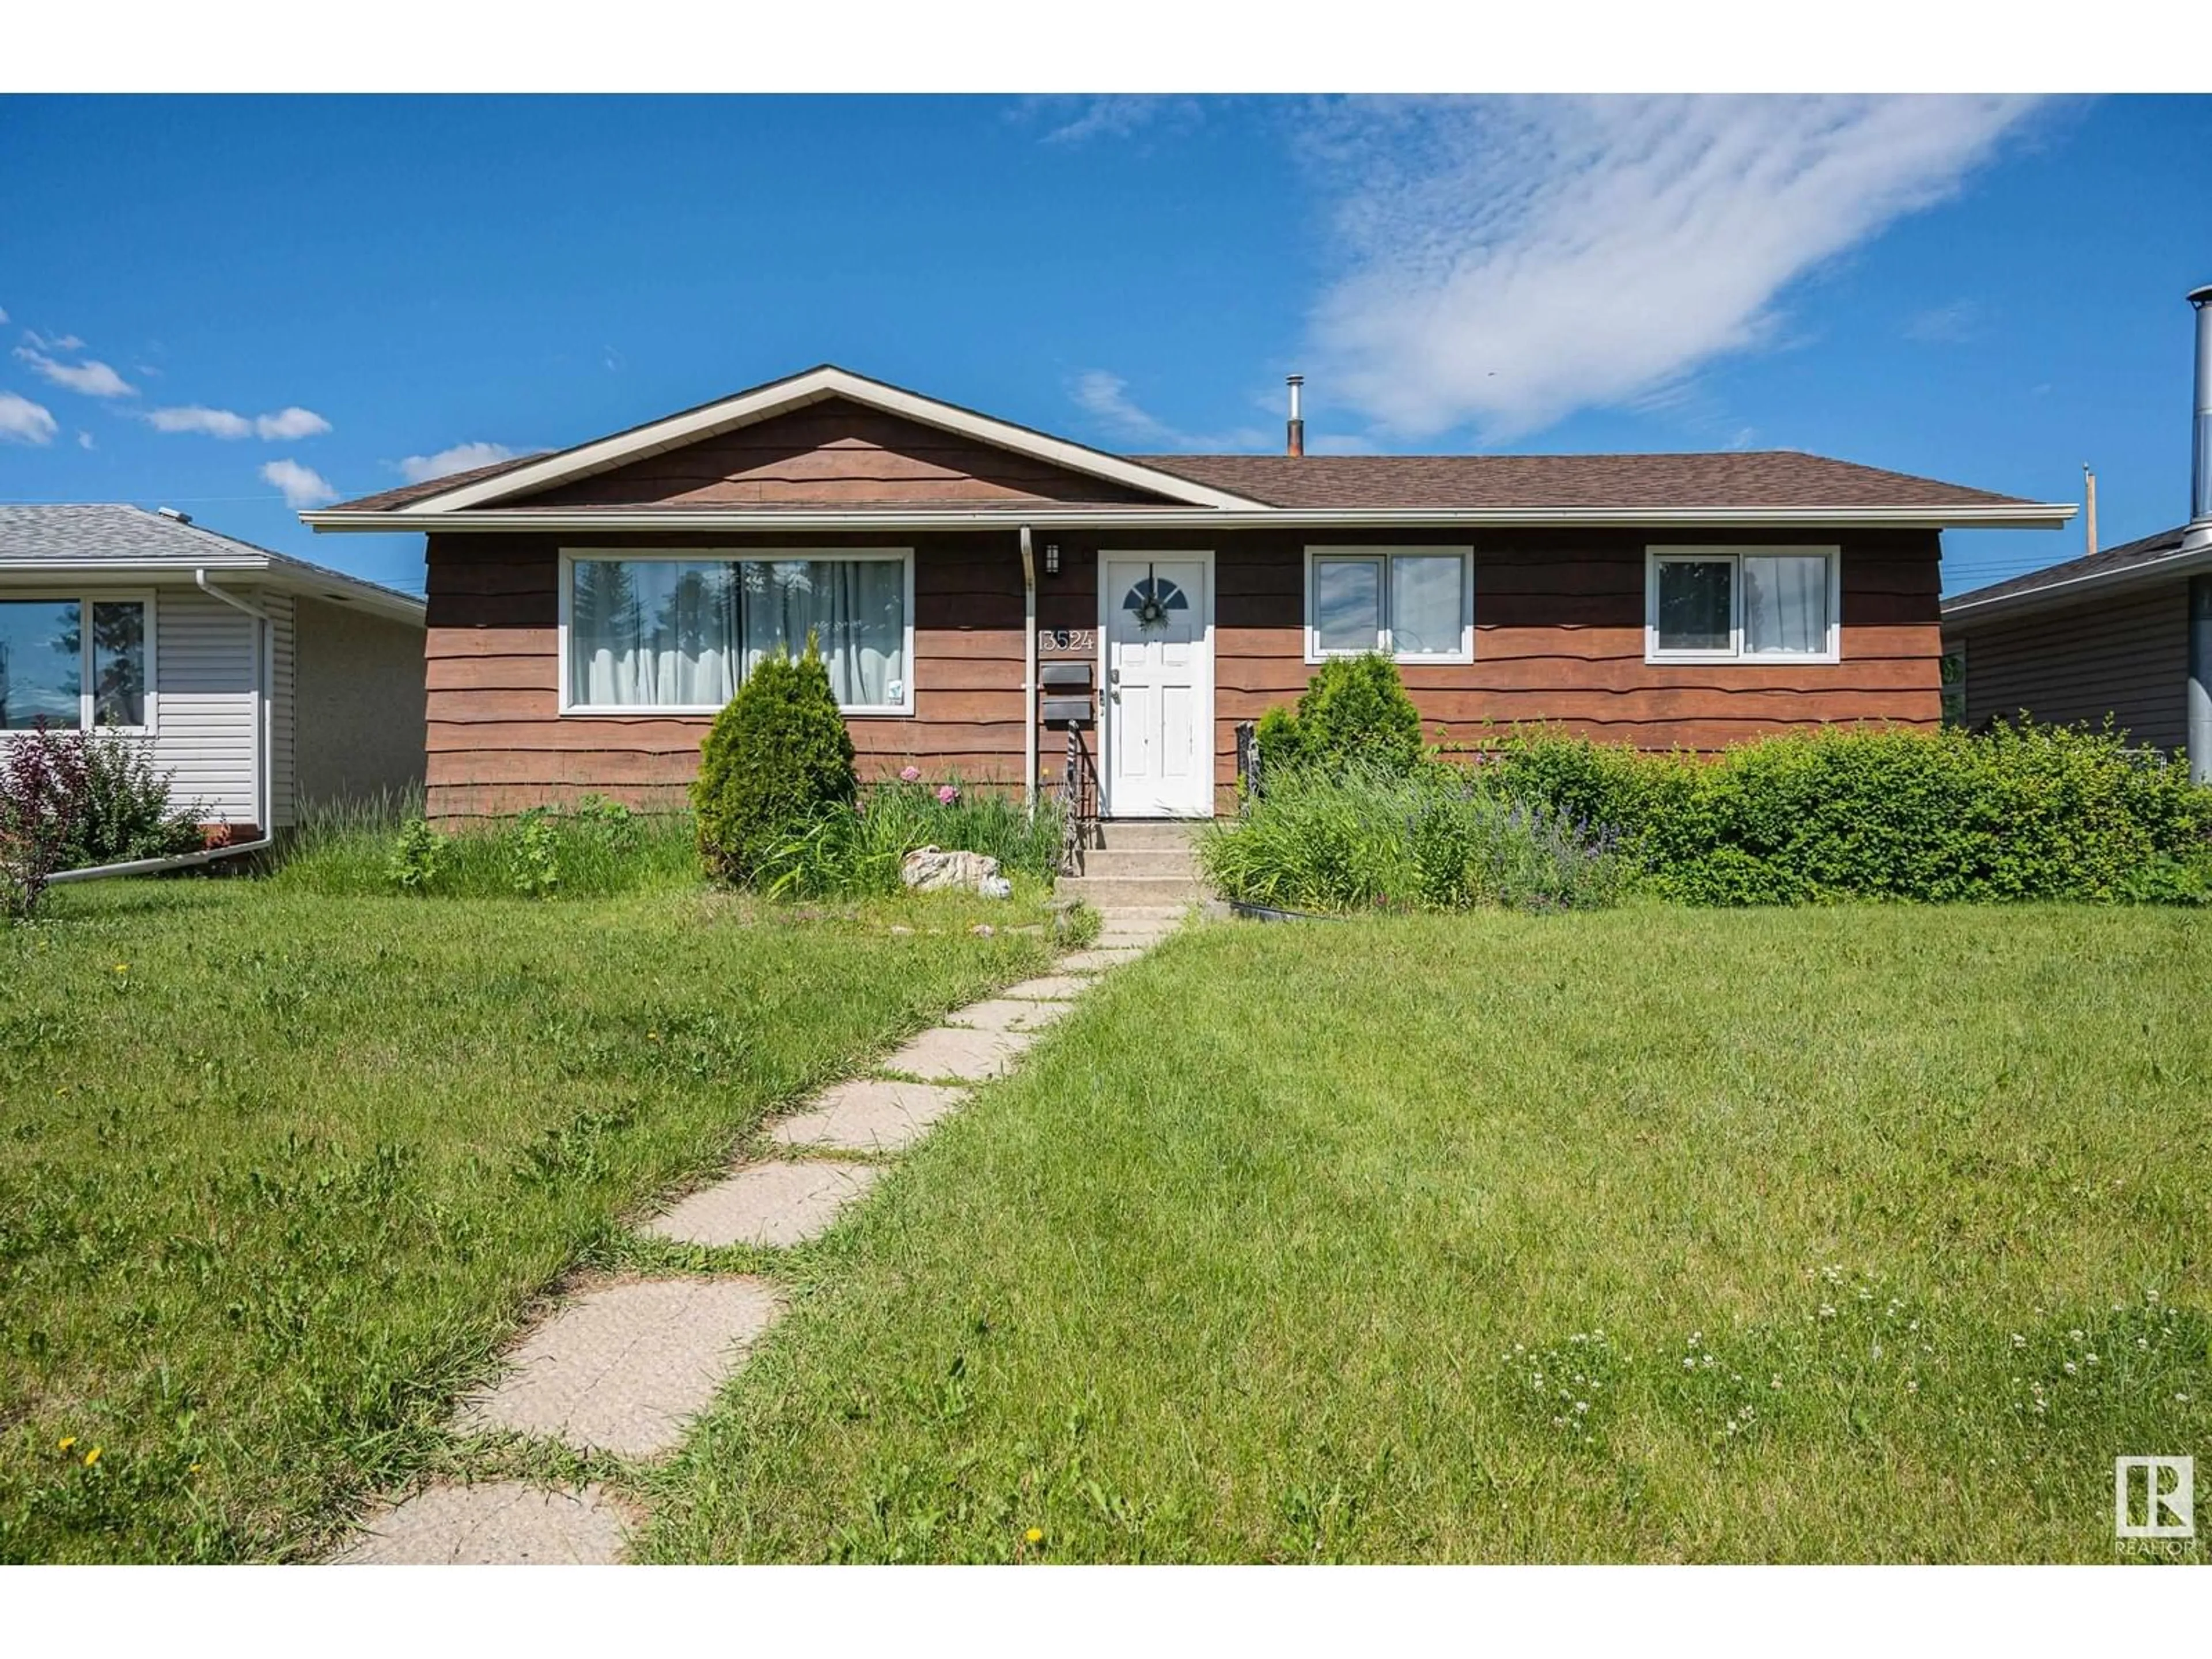 Frontside or backside of a home for 13524 110 ST NW, Edmonton Alberta T5E4Z2